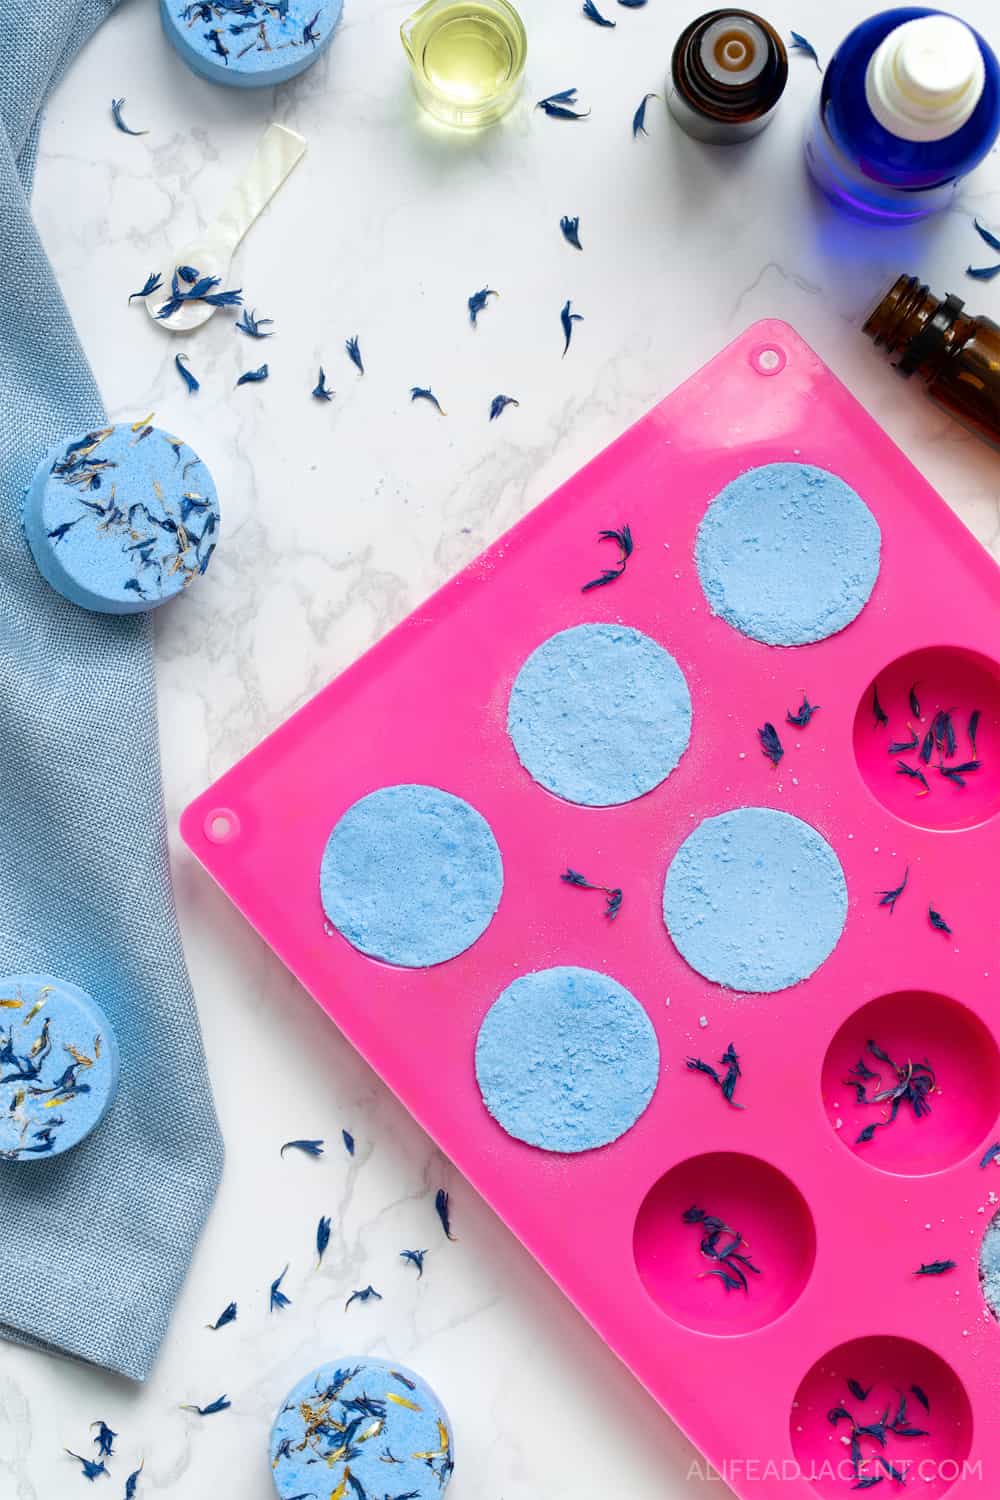 Homemade allergy relief shower melts drying in silicone mold.